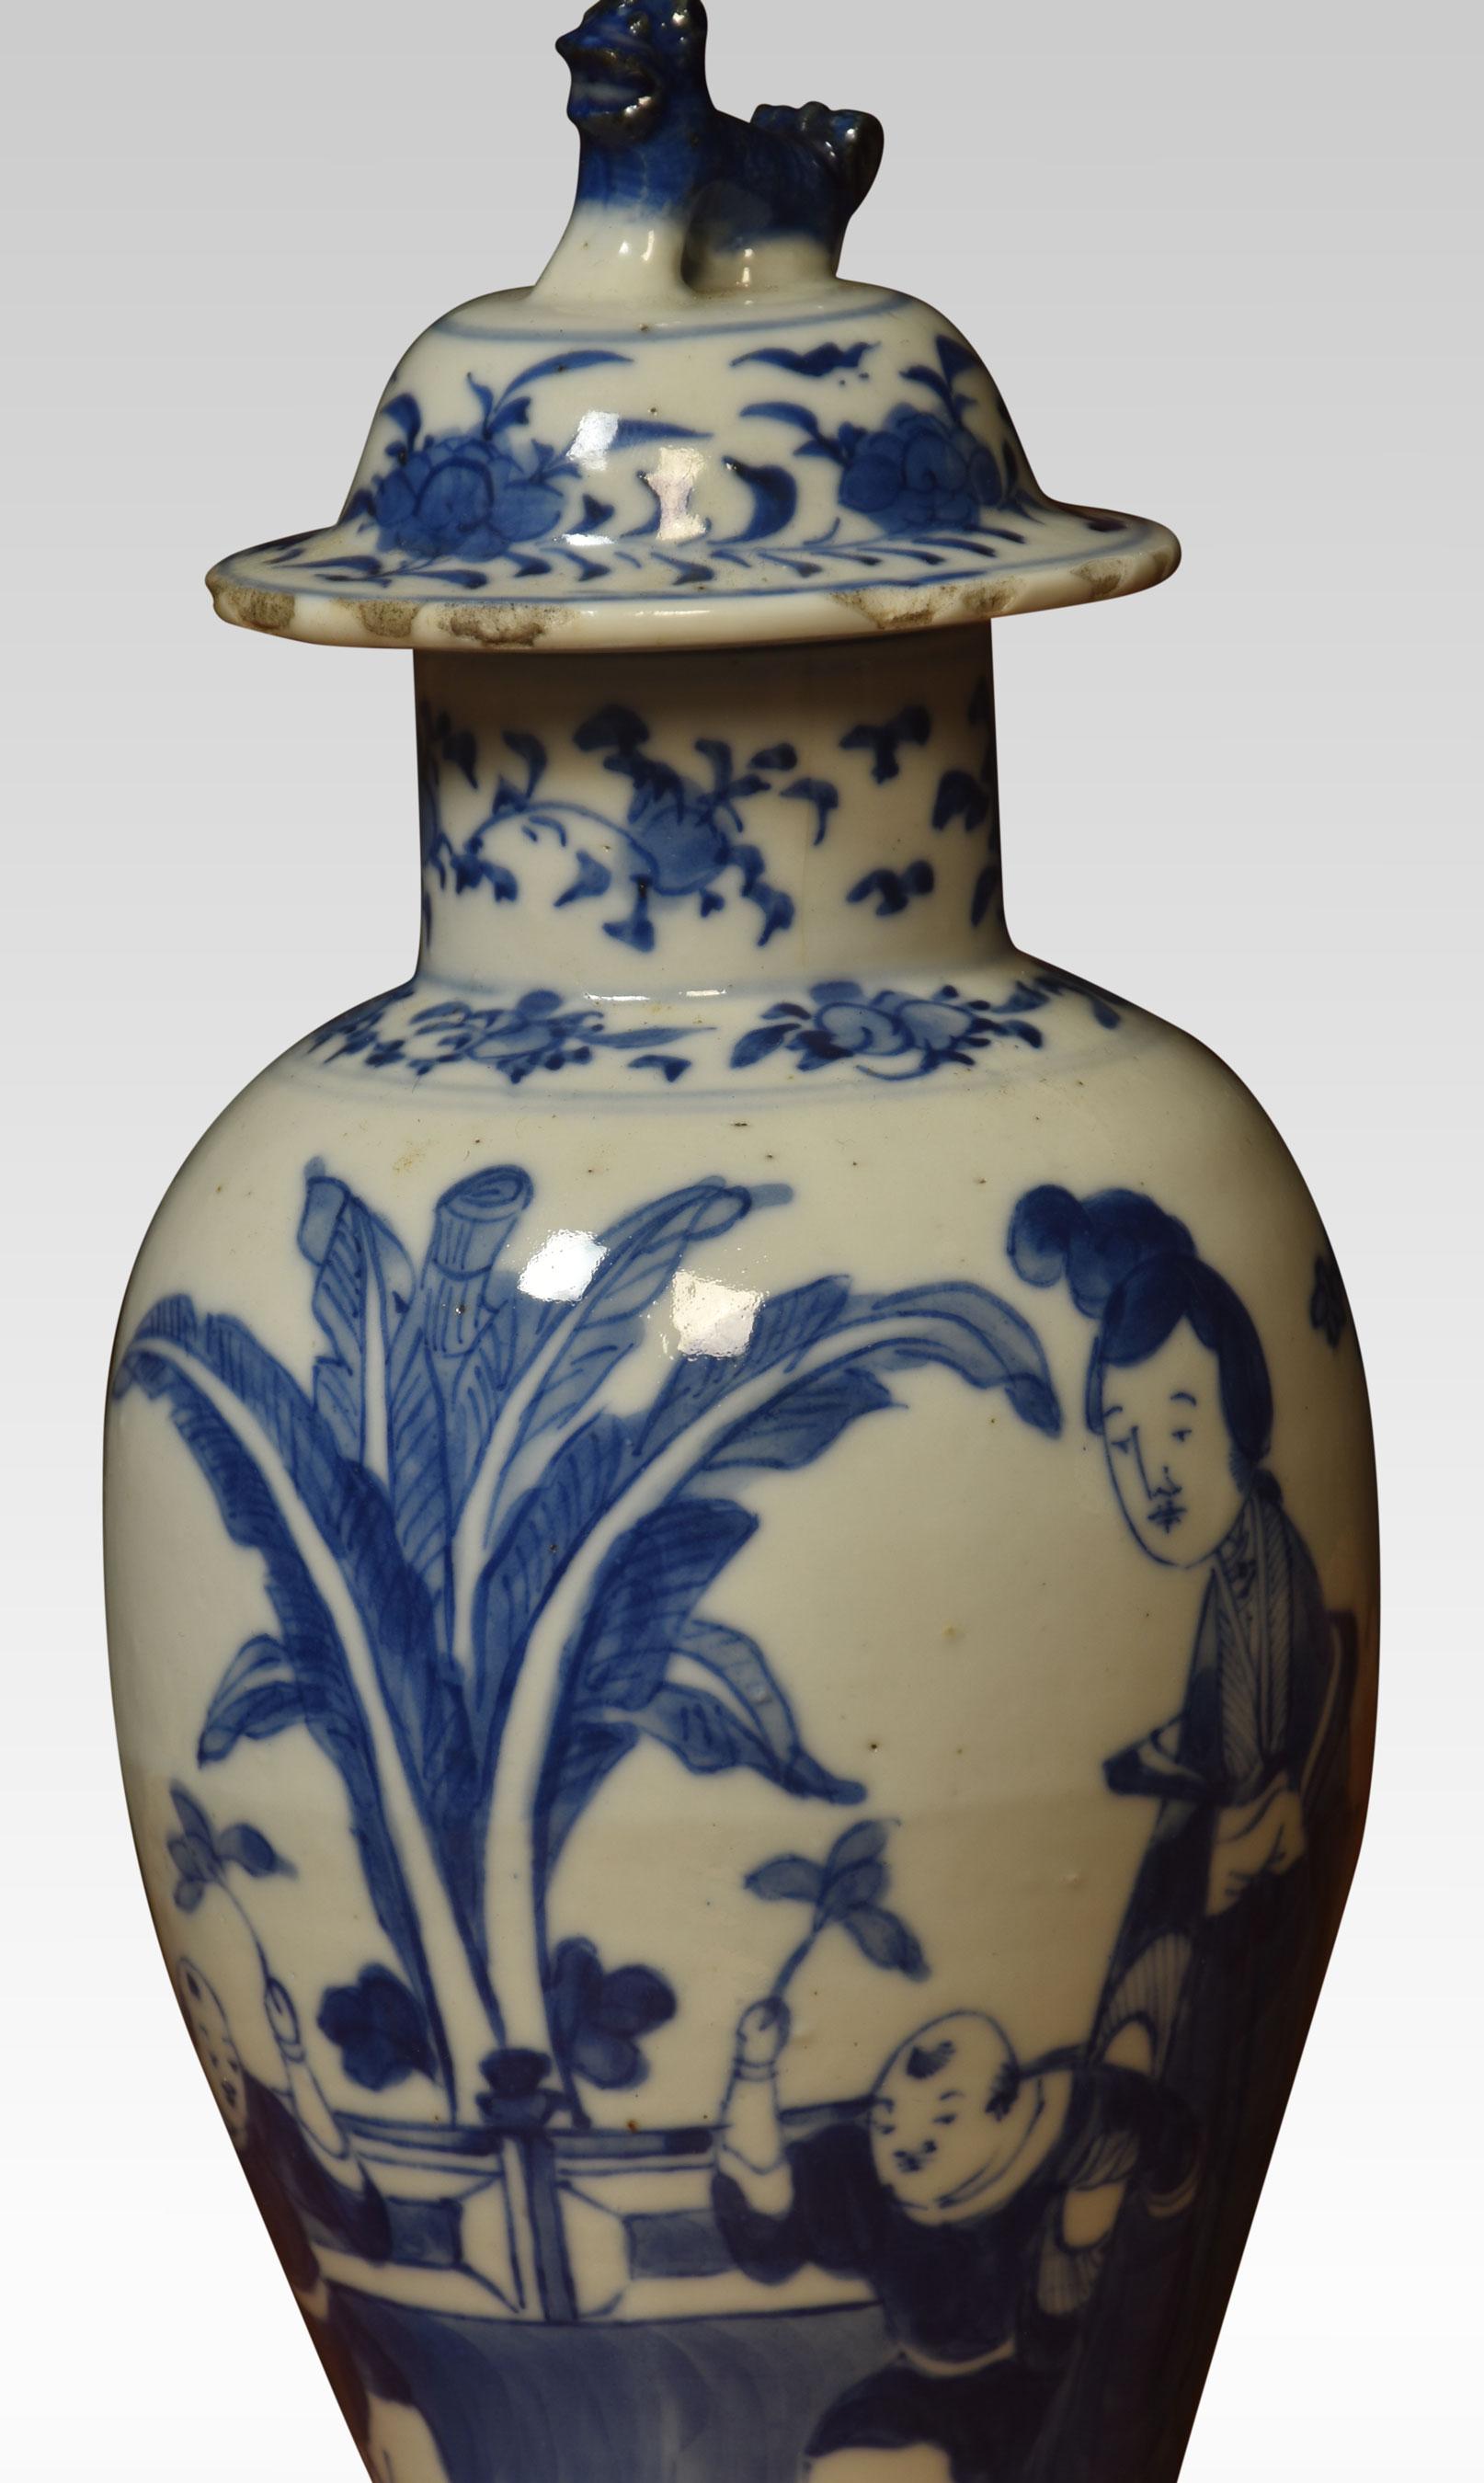 19th-century blue and white porcelain vase with painted with figures and foliating decoration on circular base some chips together with original lid.
Dimensions
Height 10.5 Inches
Width 4 Inches
Depth 4 Inches.